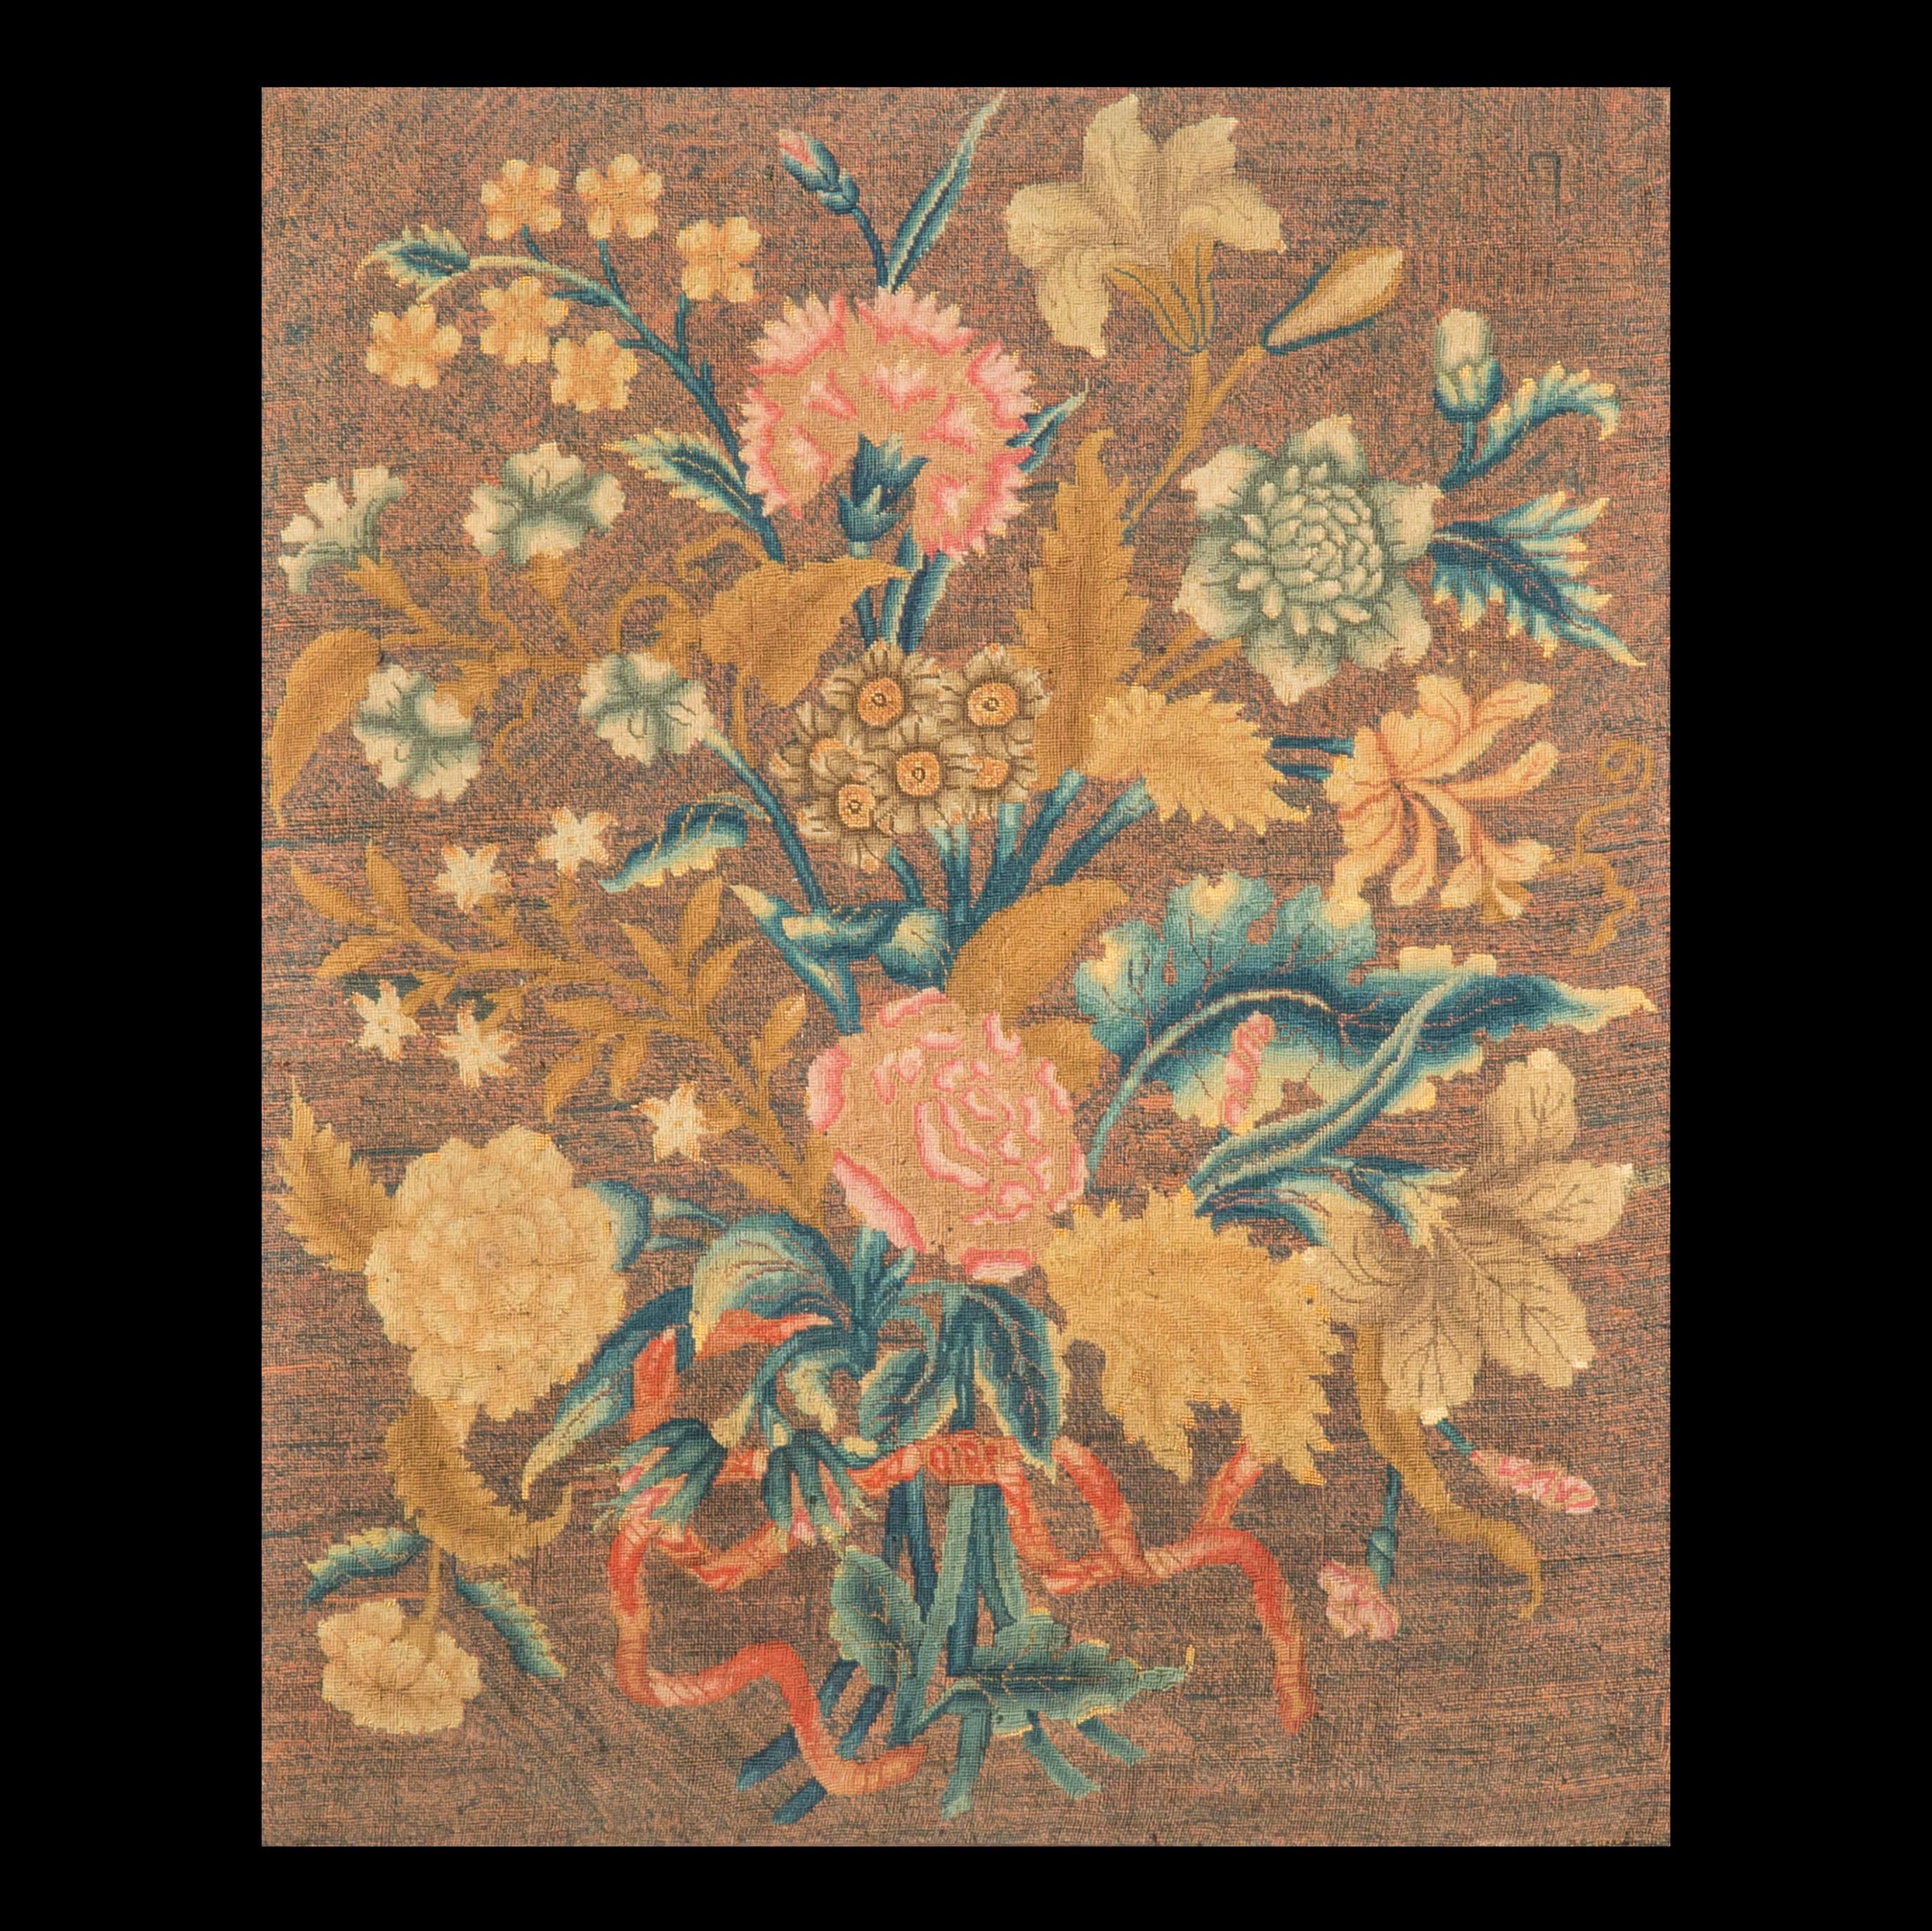 An exquisite early to mid-18th century English petit-point needlework tapestry picture, of floral design,
circa 1730-1750.

Why we like it
This is an incredibly rare example of needlework exquisitely embroidered in petite-point throughout, for